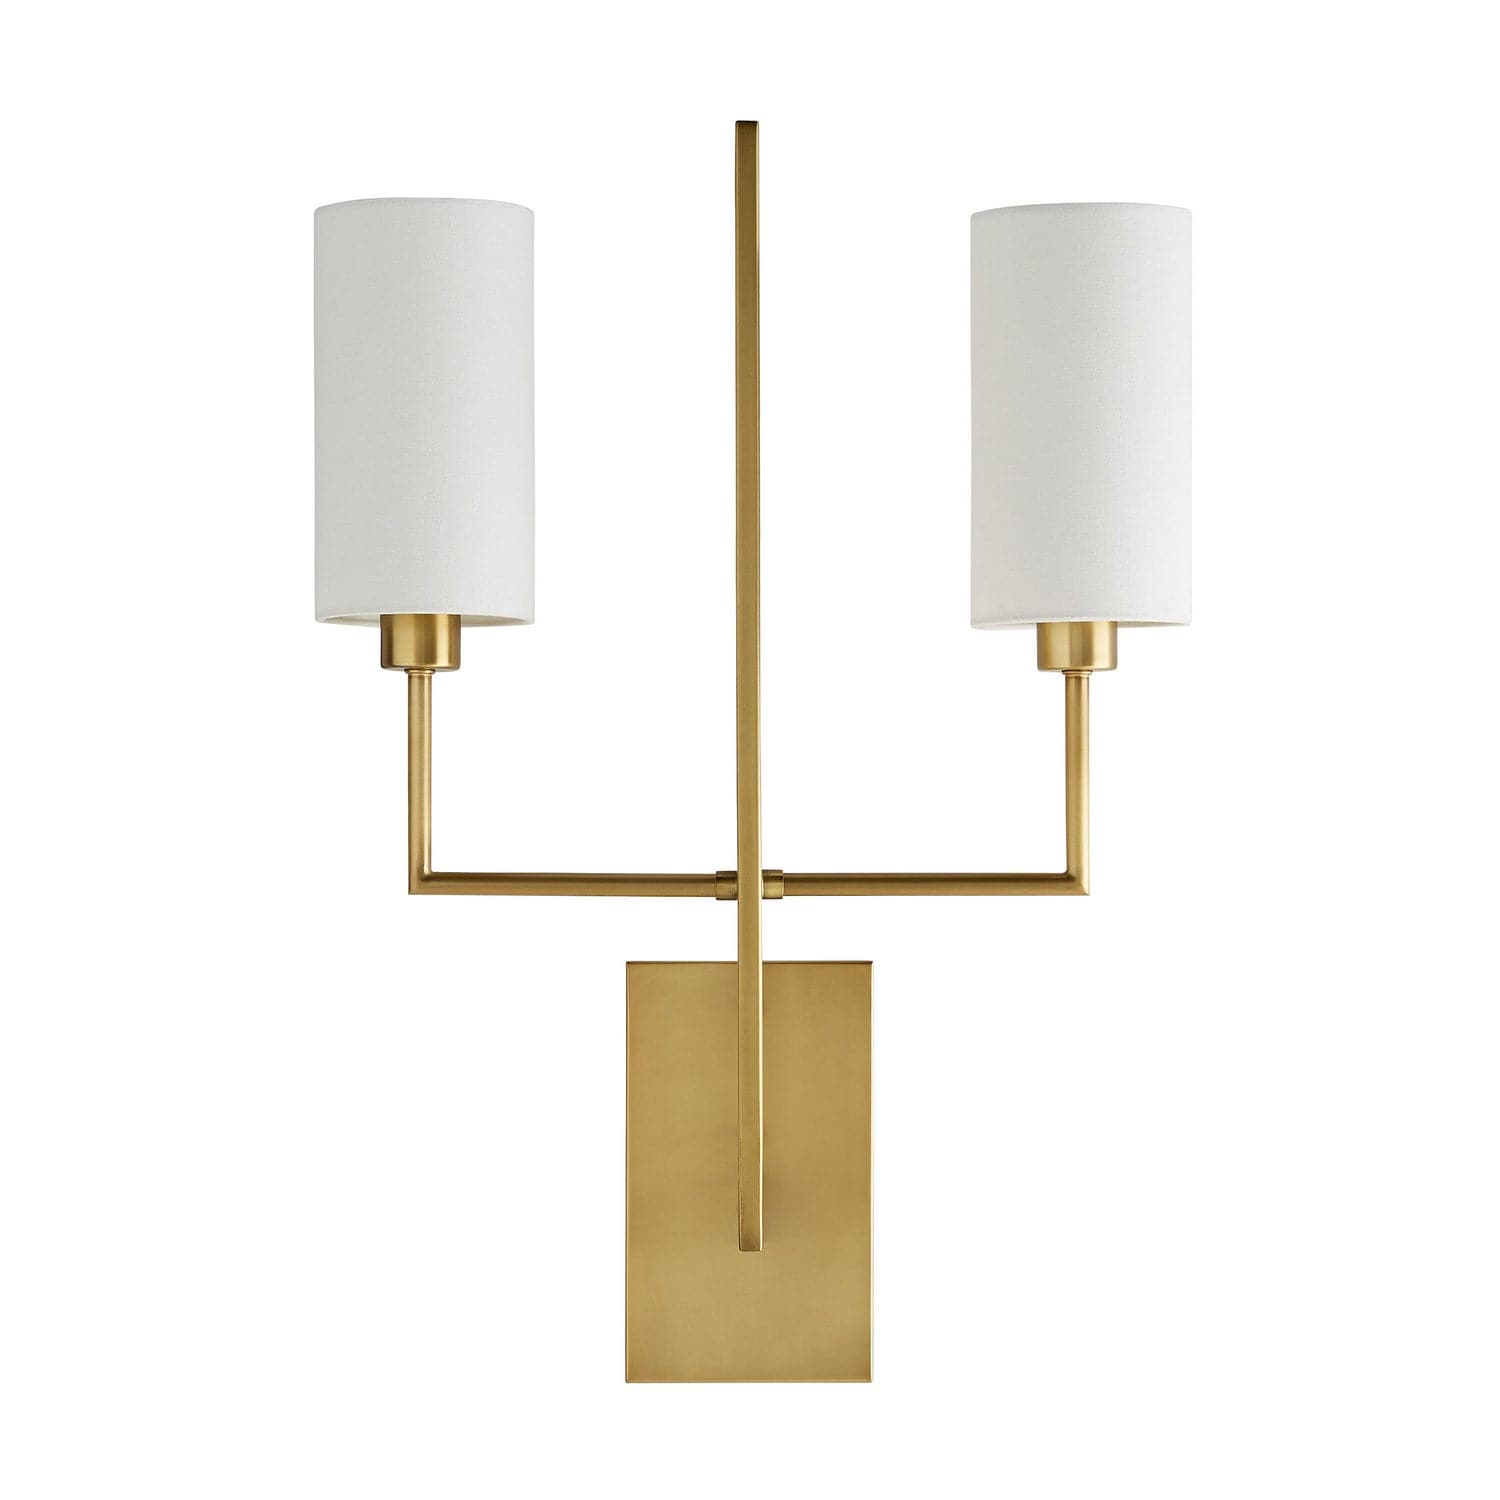 Arteriors - DB49017 - Two Light Wall Sconce - Blade - Antique Brass